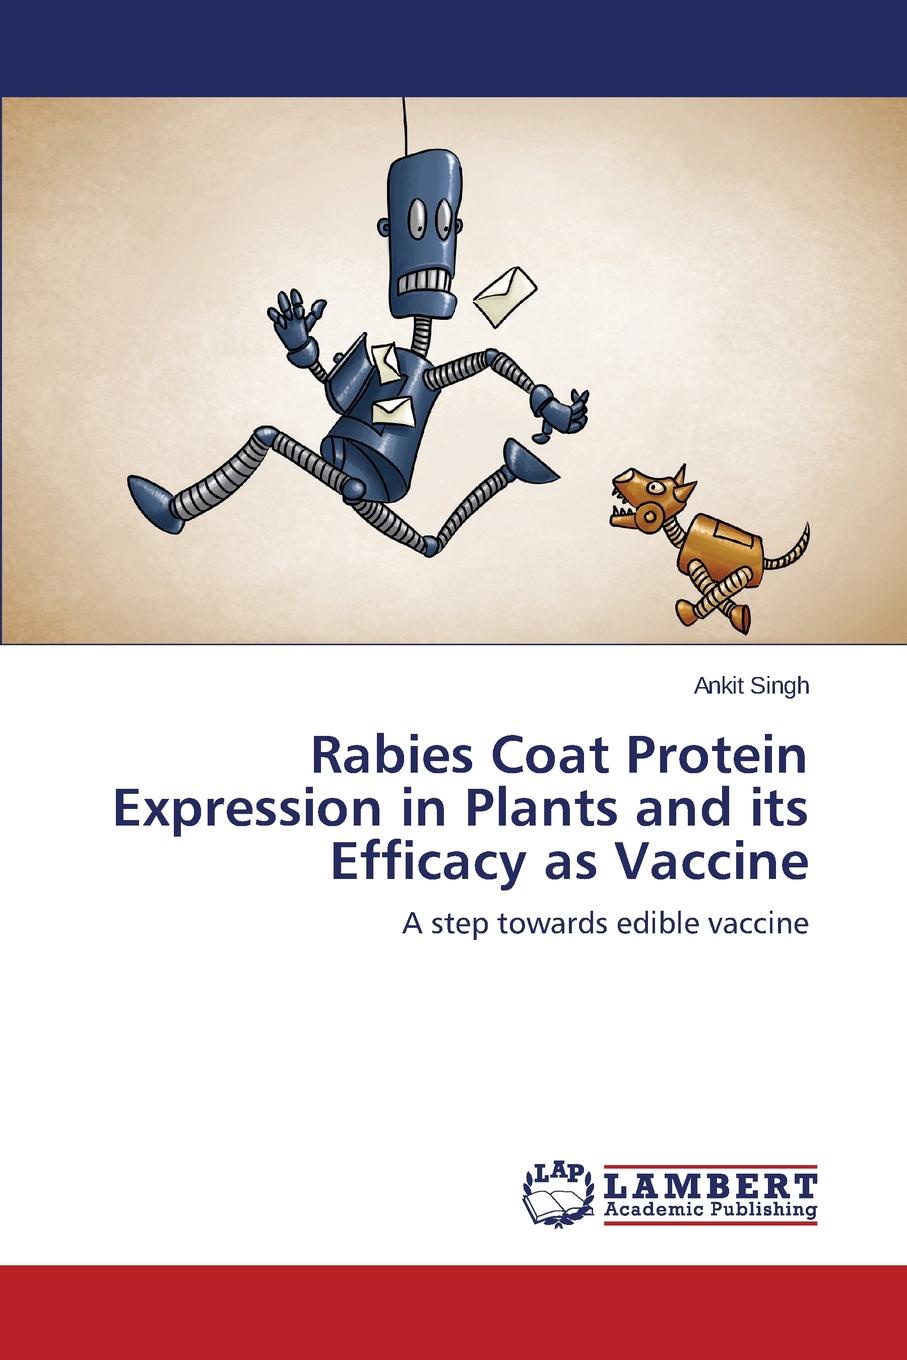 Rabies Coat Protein Expression in Plants and its Efficacy as Vaccine